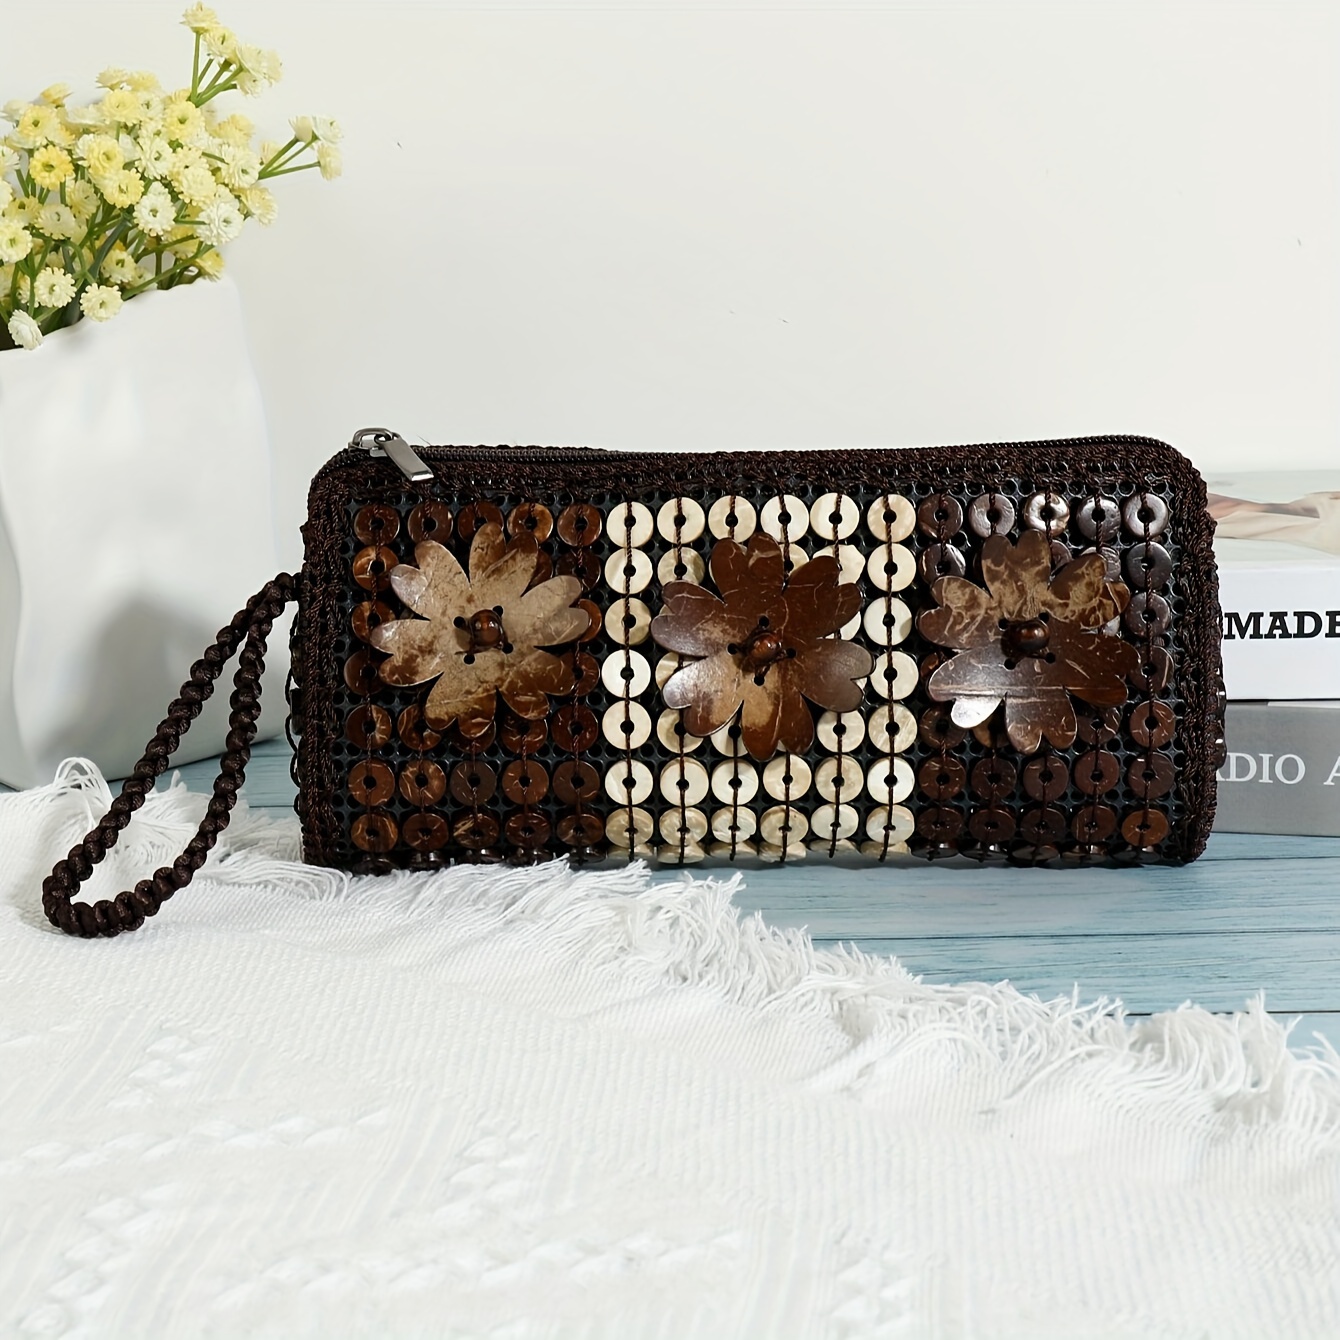 

Handcrafted Coconut Shell Long Purse For Women, Ethnic Chic Style Fashion Clutch With Floral Detail